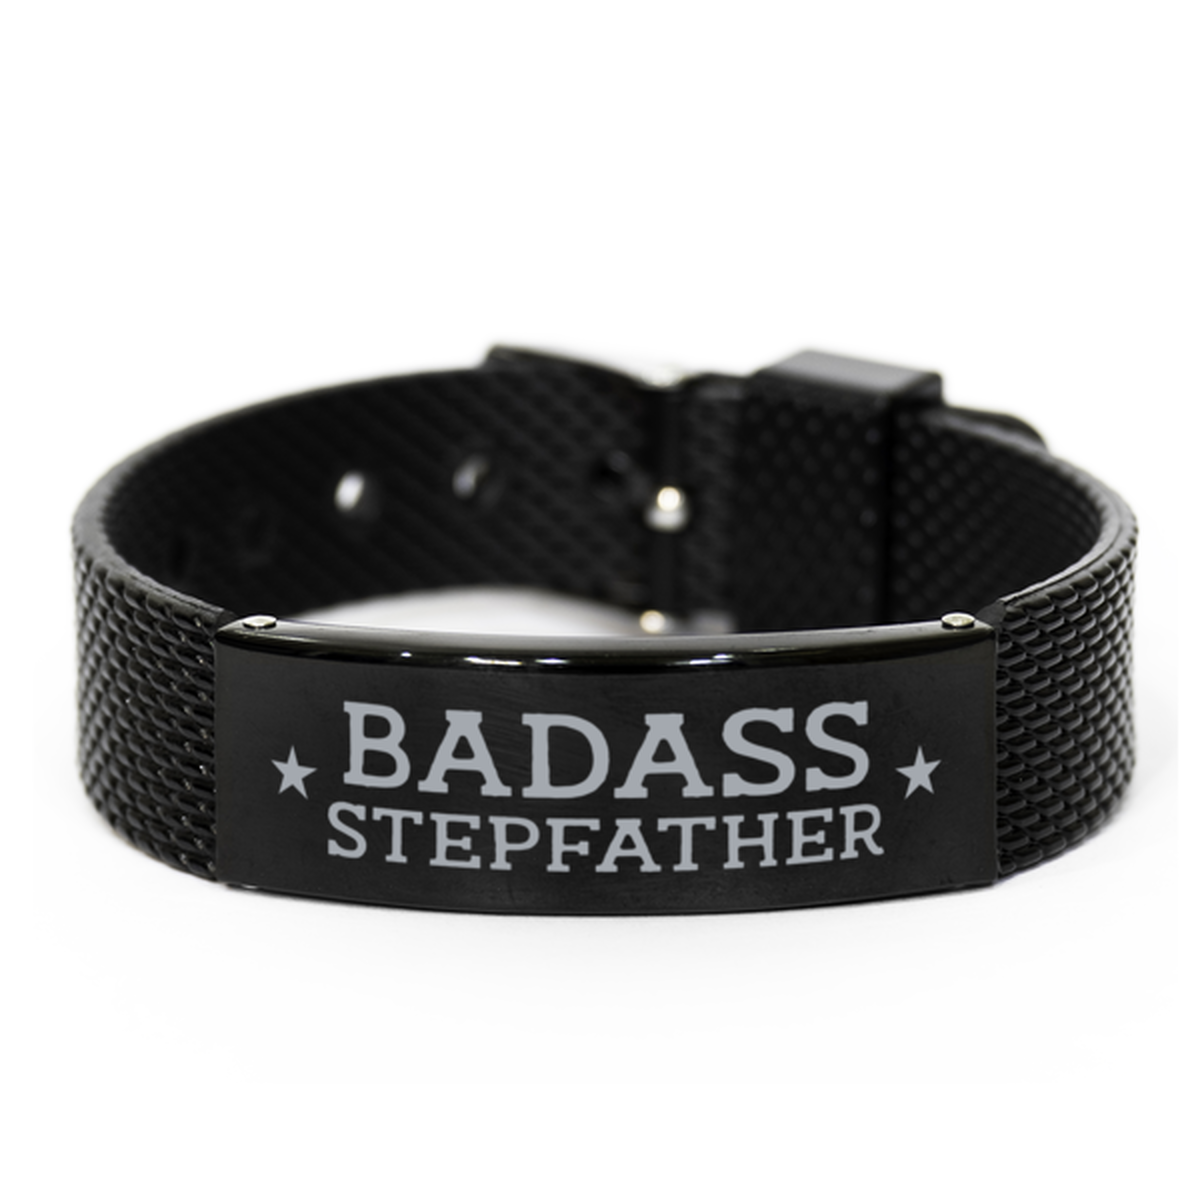 Stepfather Black Shark Mesh Bracelet, Badass Stepfather, Funny Family Gifts For Stepfather From Son Daughter